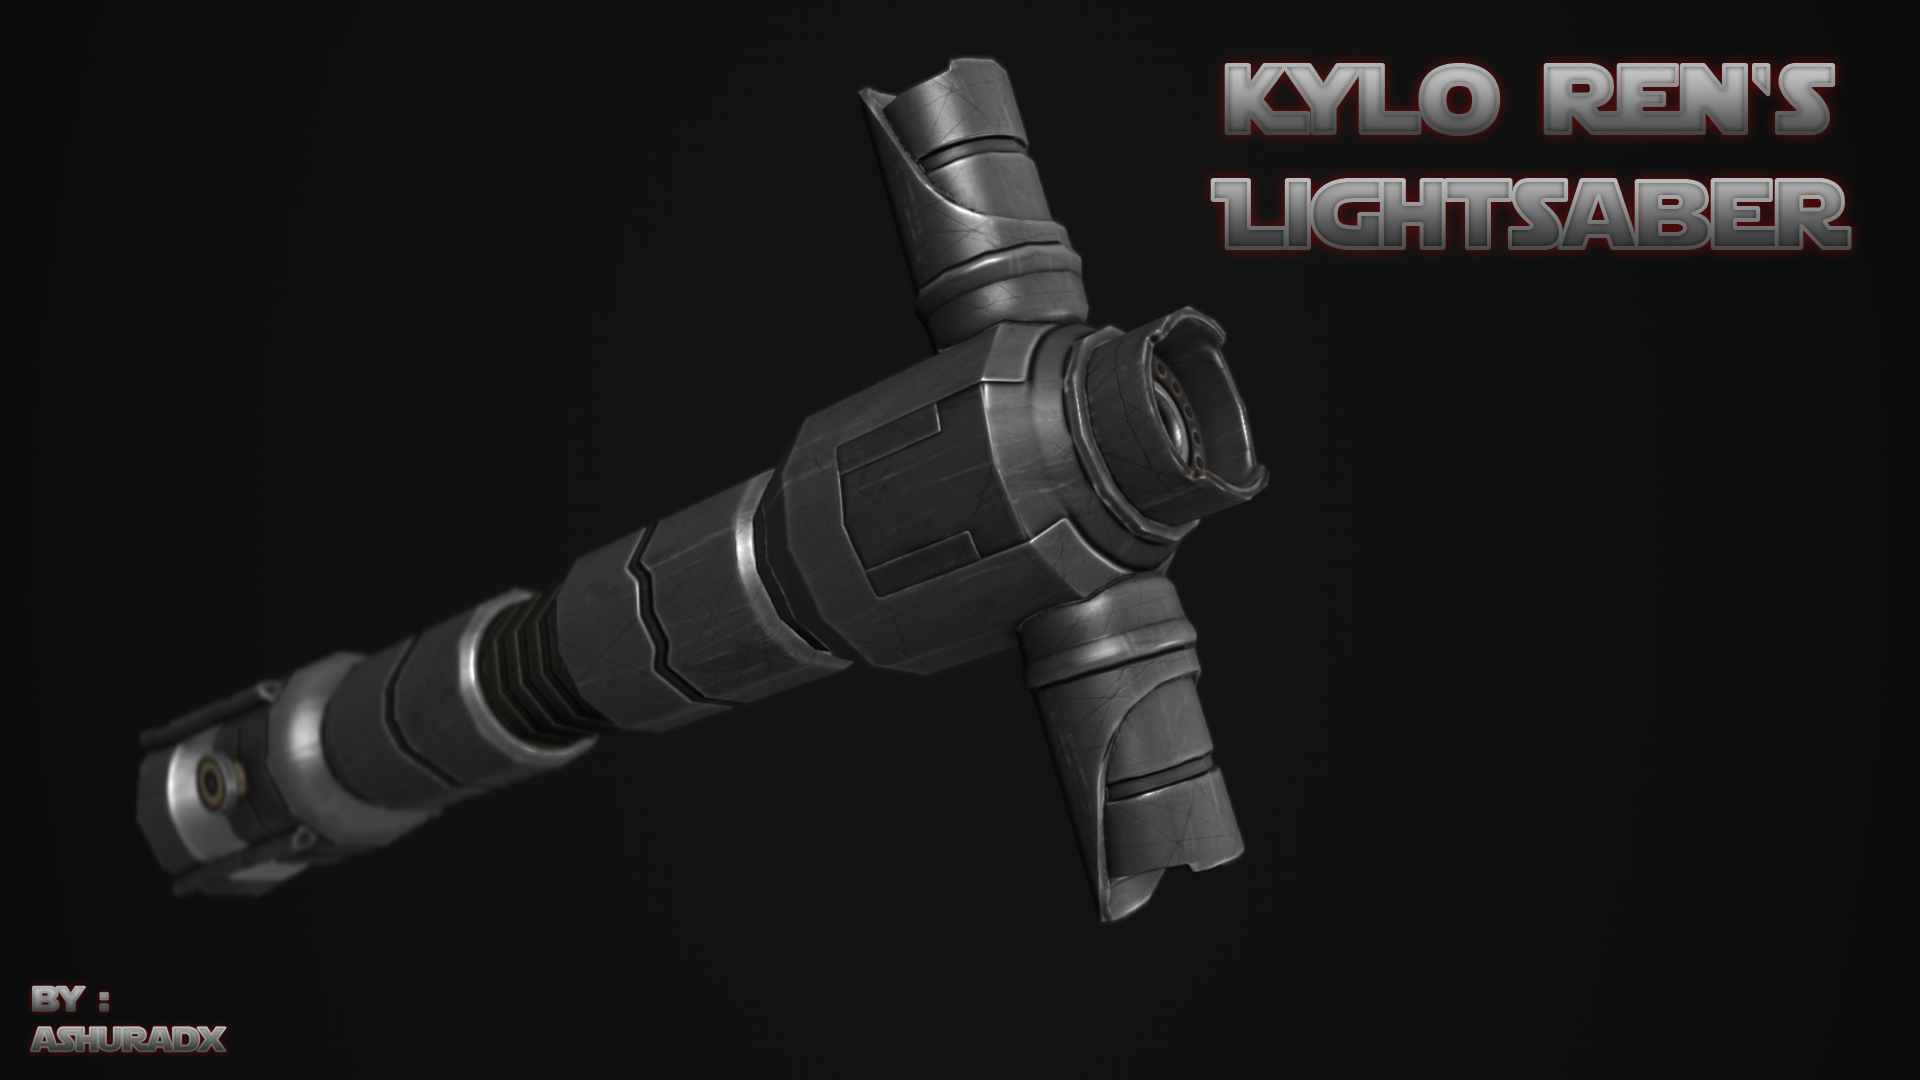 More information about "Kylo Ren's Lightaber - ADX"